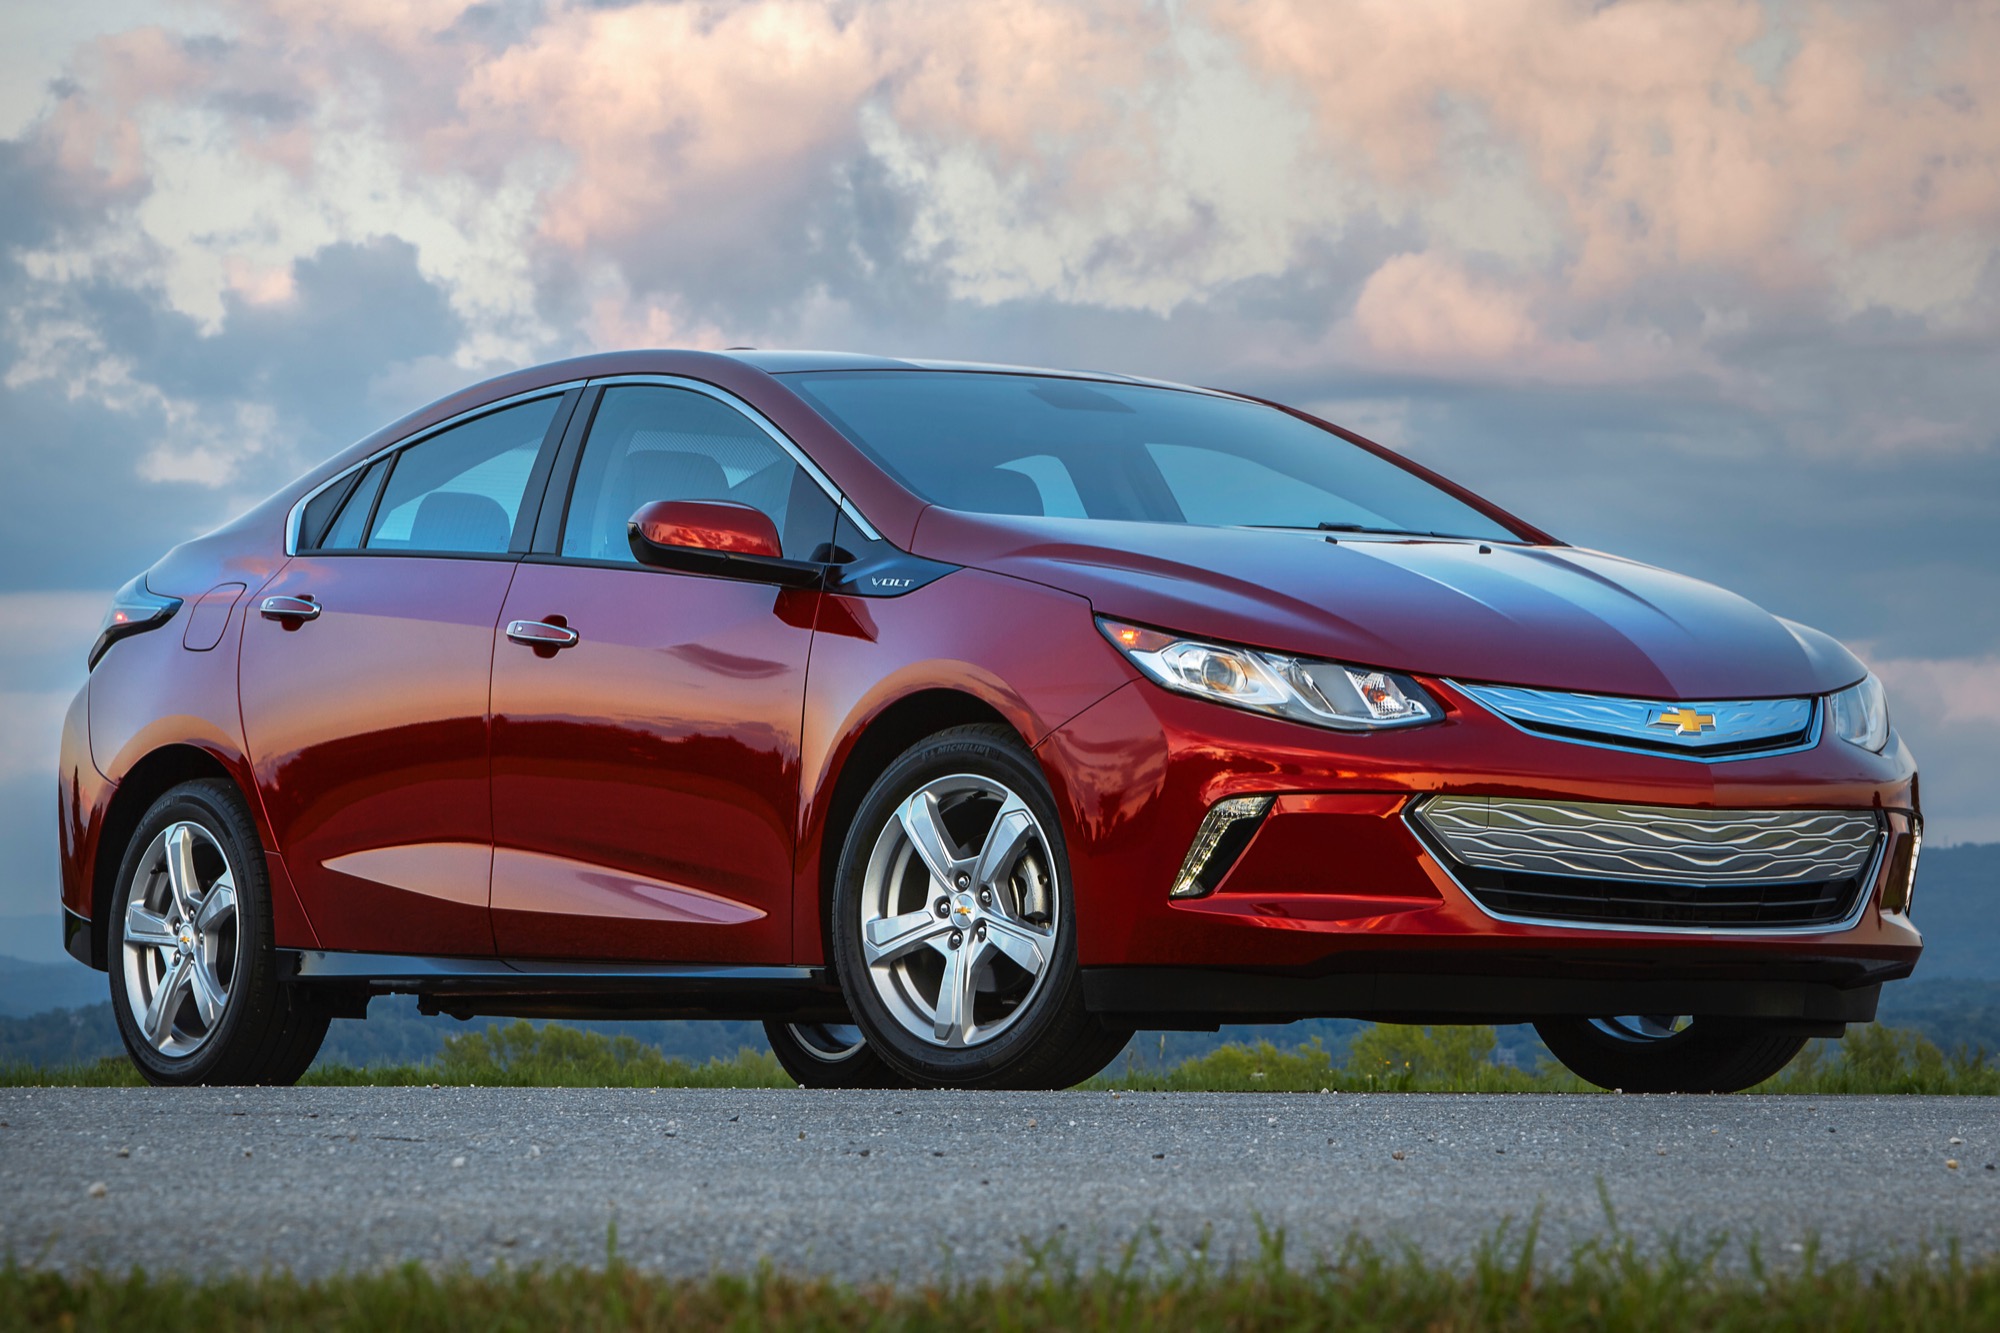 Chevy Volt Among Best Used PHEVs, According To Kelley Blue Book